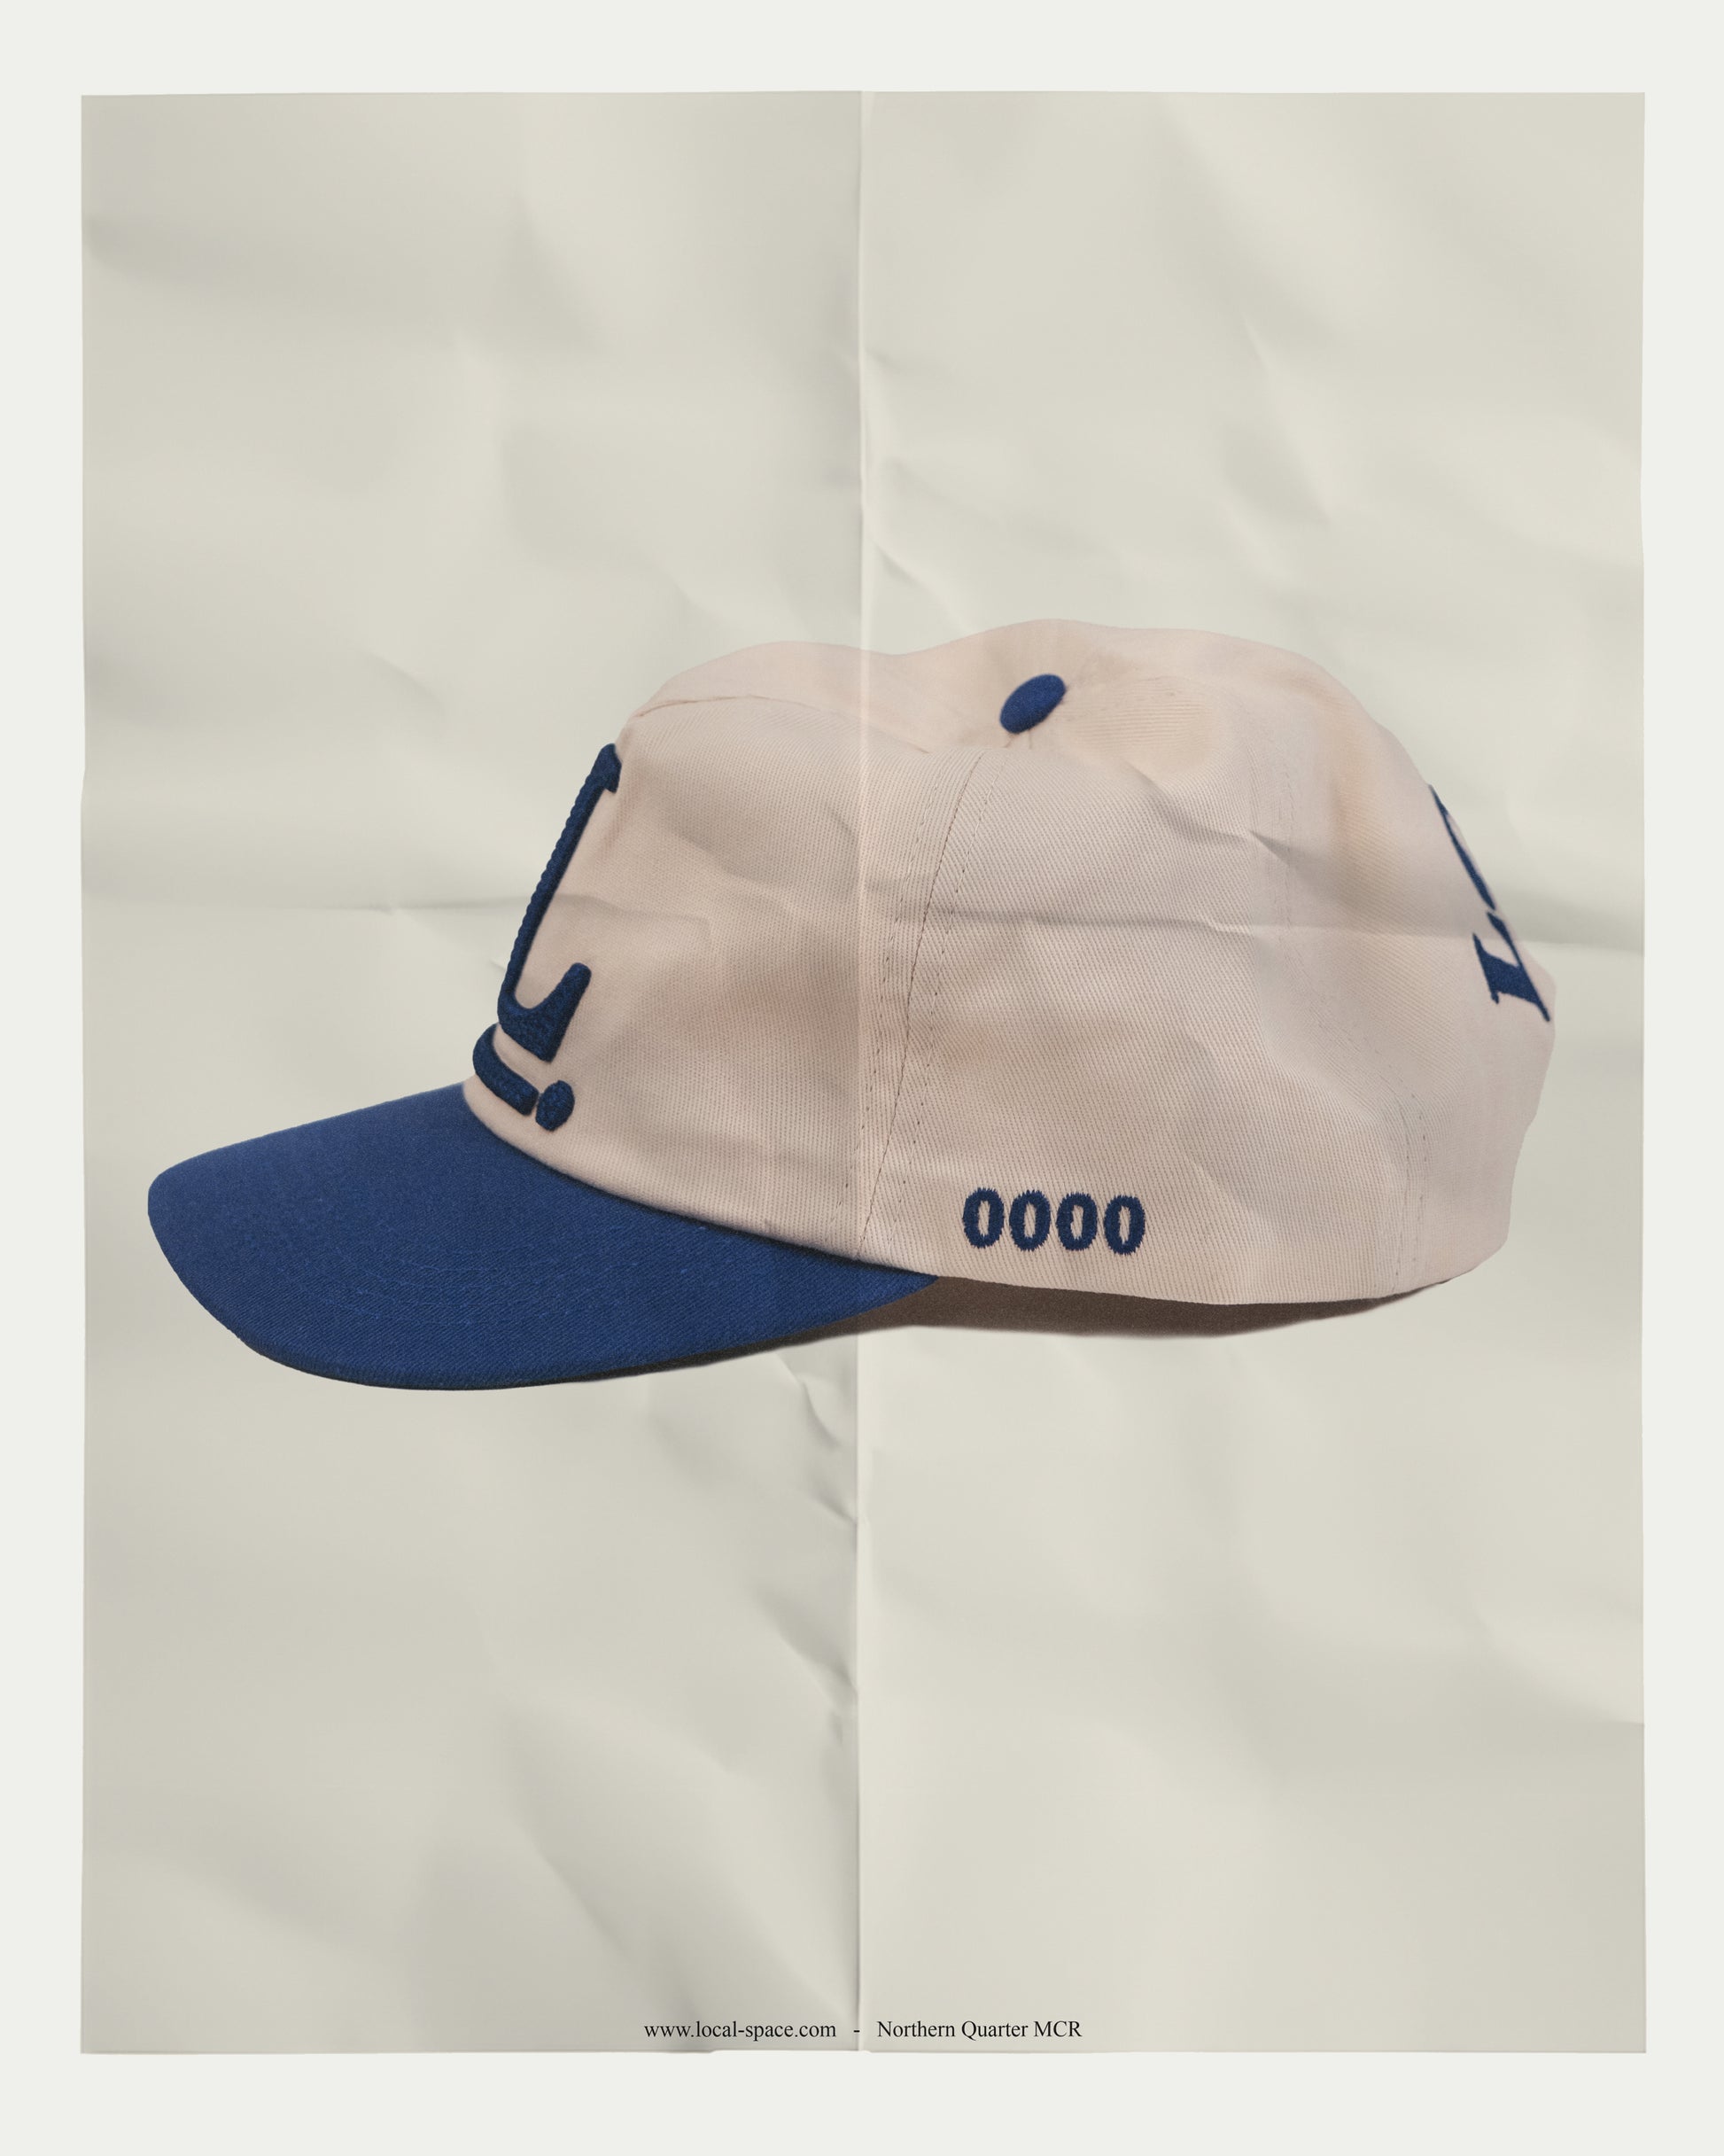 Vintage Inspired Snapback cap with Local Space emblem in 3D chain embroidery on the front, ISSUE 0000 on the left, and LOCAL logo on the rear, showcasing an unstructured crown and a green under brim